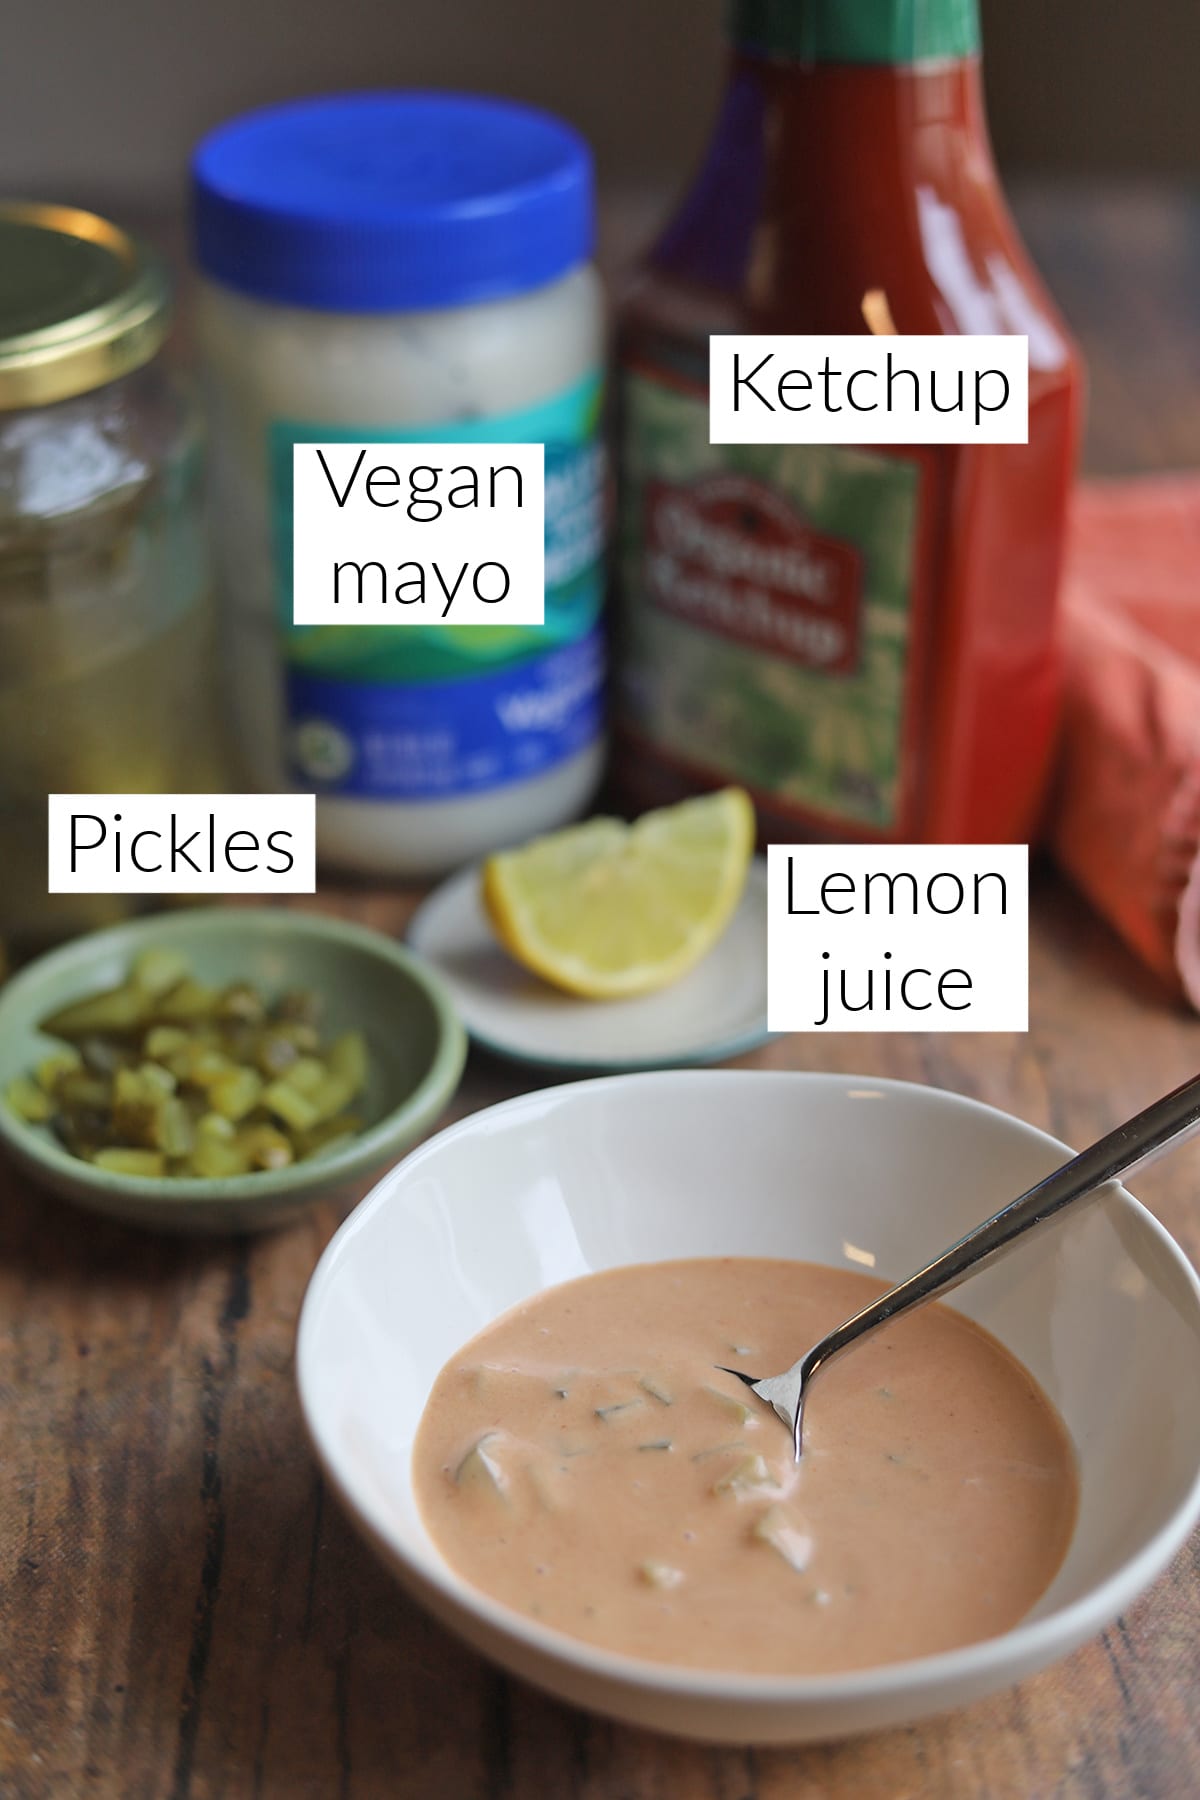 Labeled ingredients for vegan Thousand Island dressing.